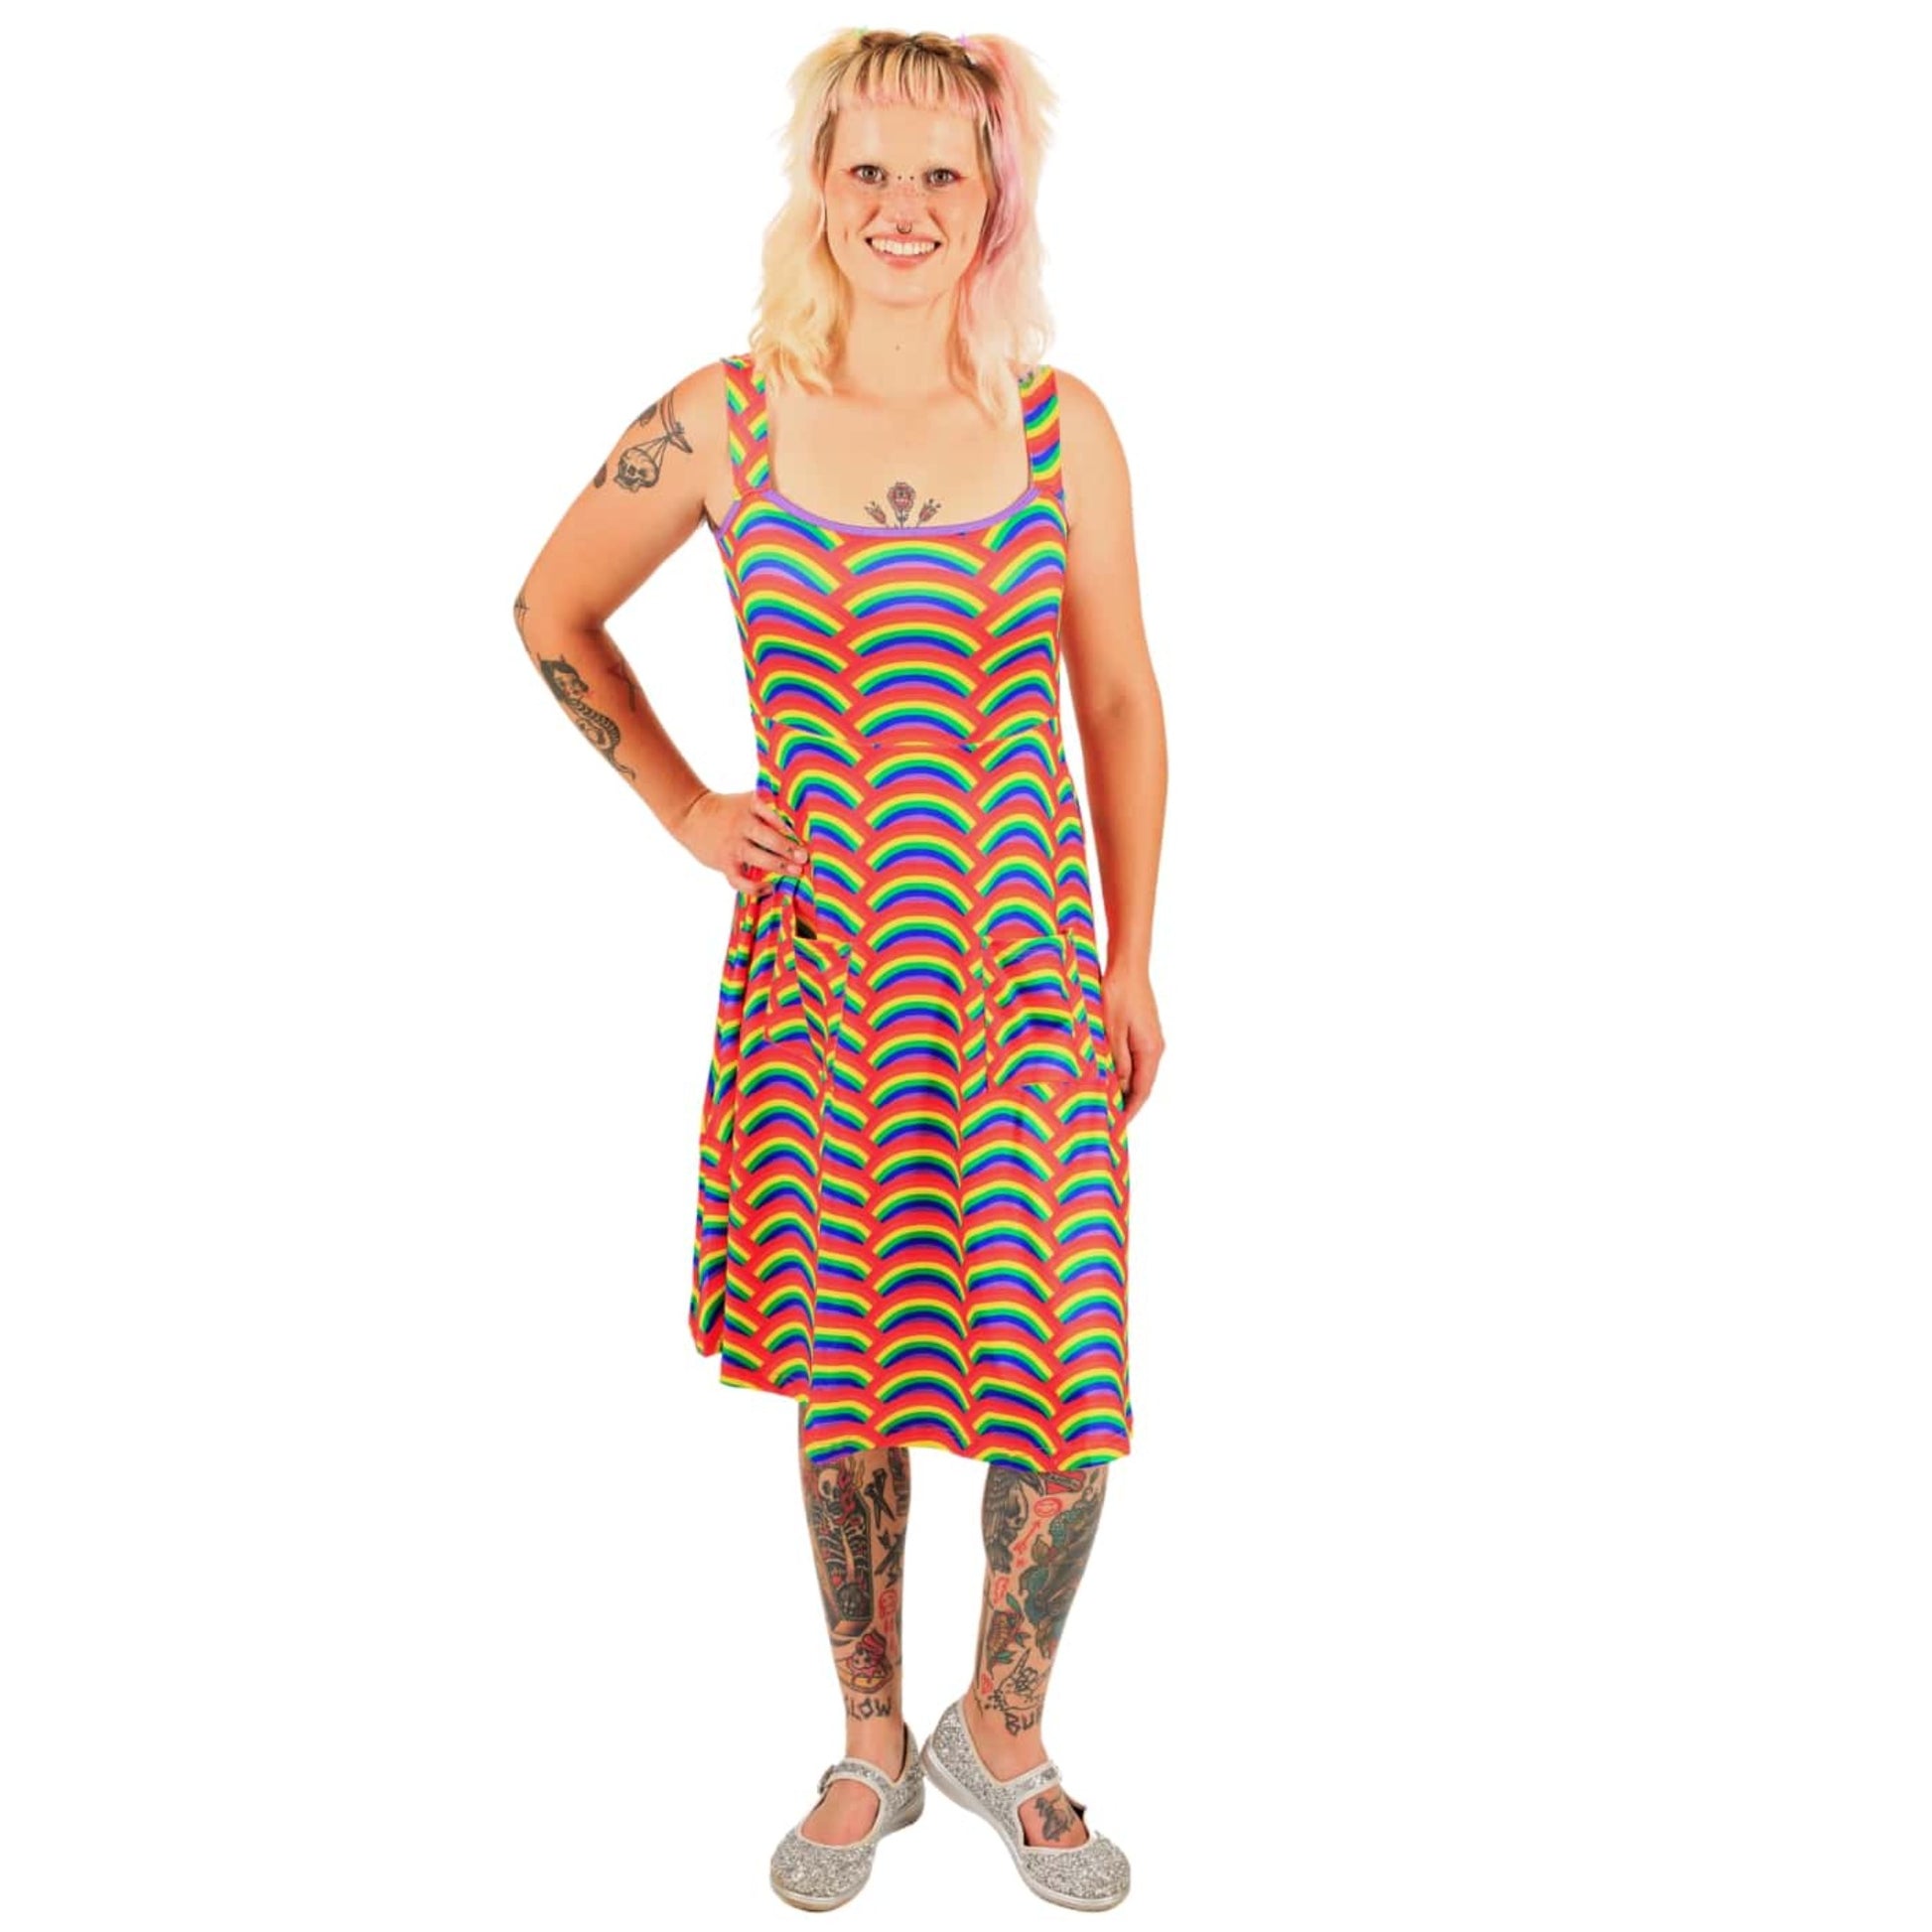 Rainbow Pinafore by RainbowsAndFairies.com.au (Rainbows - Pride - Psychedelic - Dress With Pockets - Pinny - Kitsch - Vintage Inspired) - SKU: CL_PFORE_RAINB_ORG - Pic-02